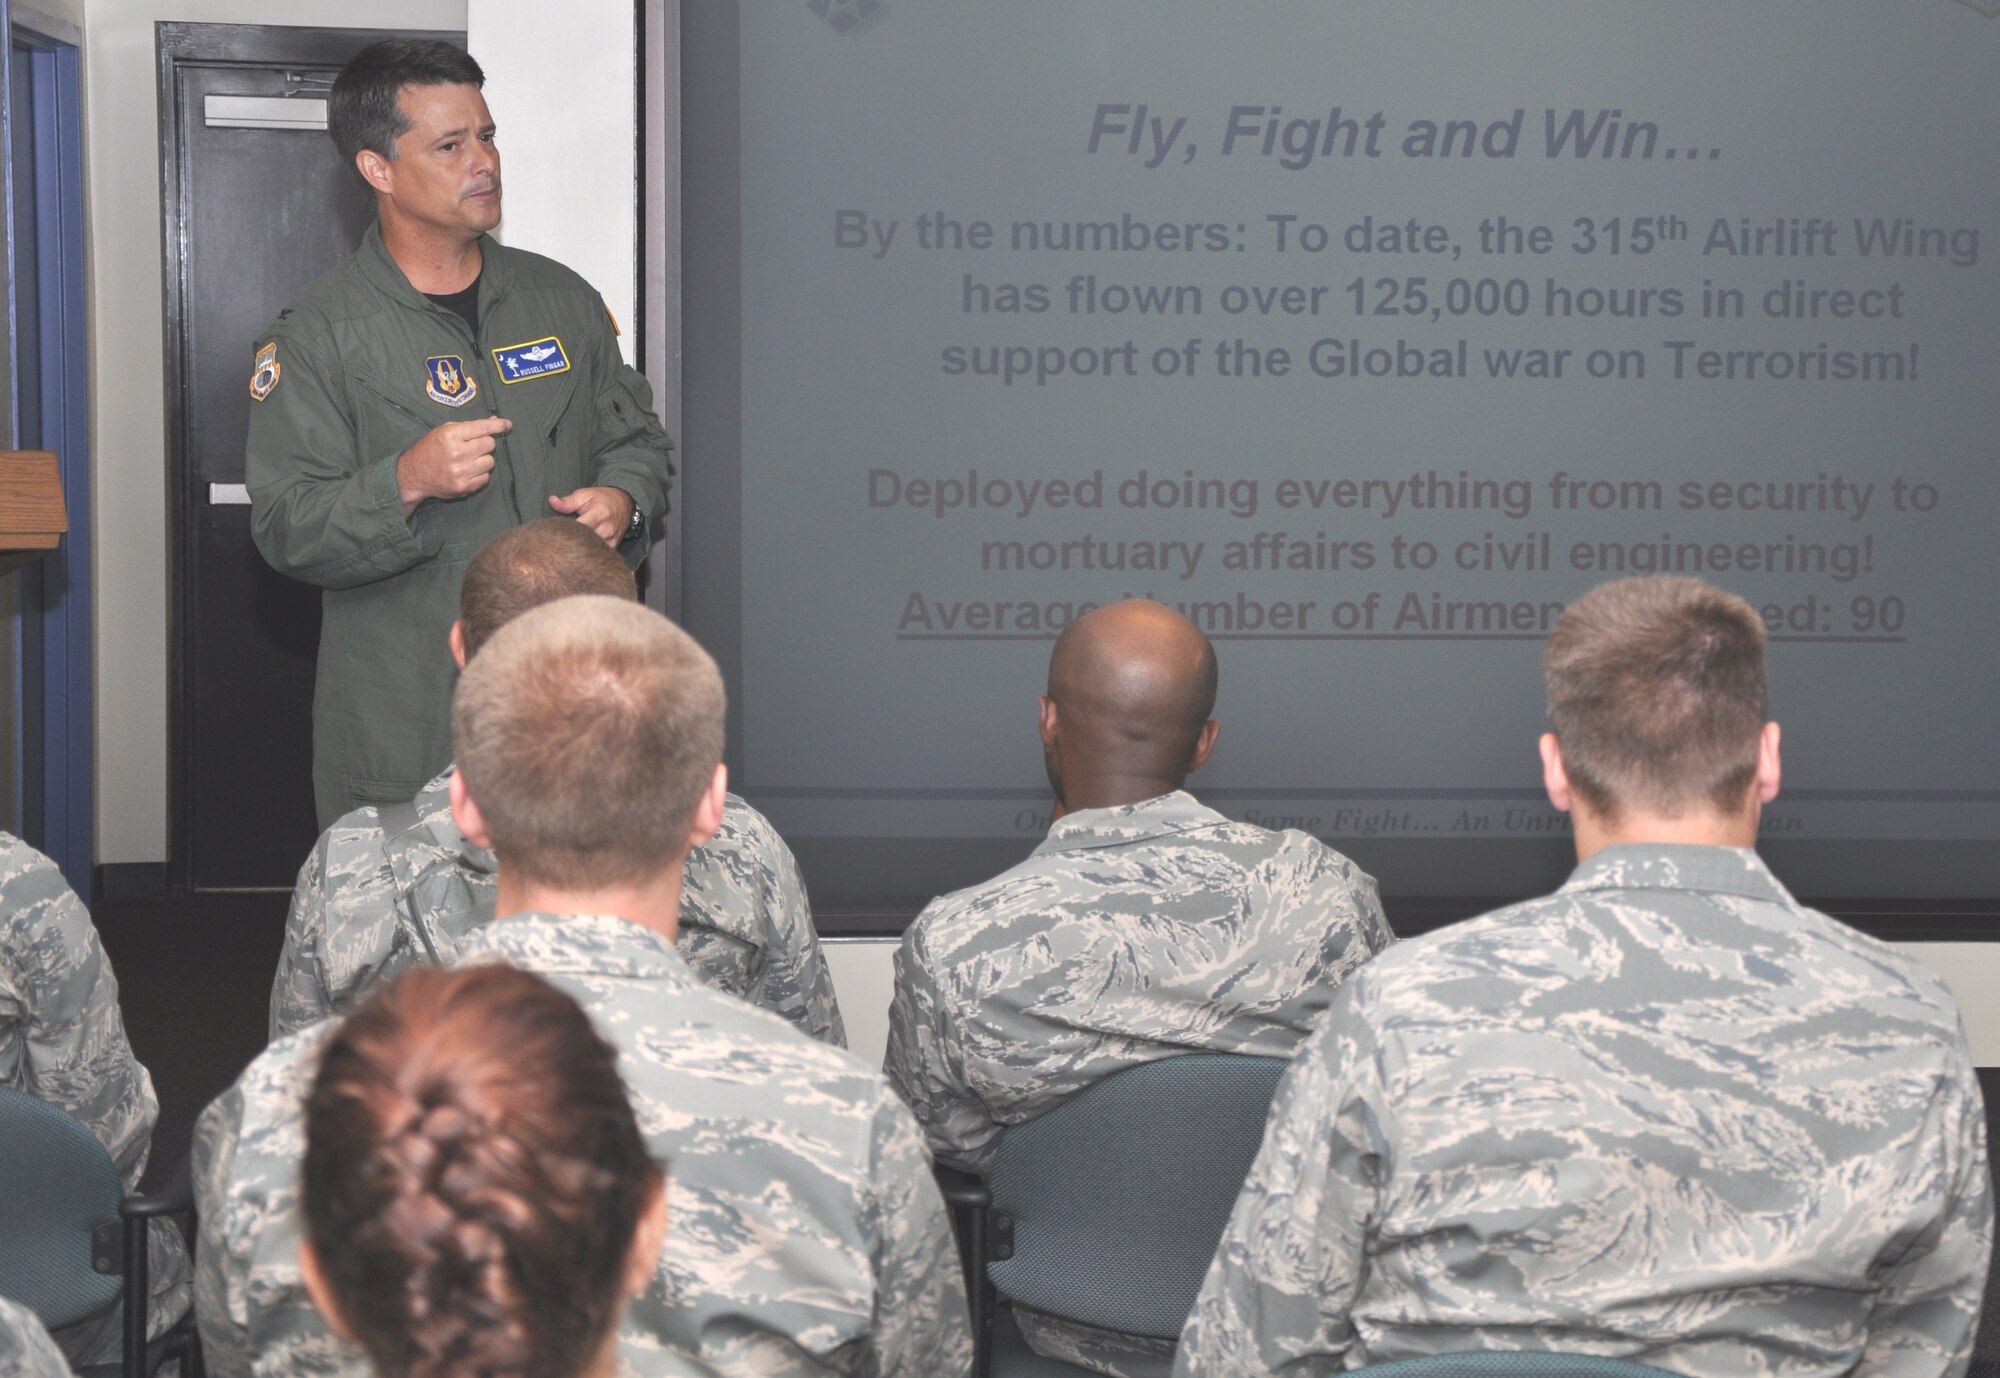 Col. Russell Fingar discusses the 315th Airlift Wing mission to 30 Air Force chaplain candidates July 26, 2010, at Charleston Air Force Base, S.C. Col. Fingar is the 315th Arilift Wing vice commander.  (U.S. Air Force photo/Staff Sgt. Shane Ellis)